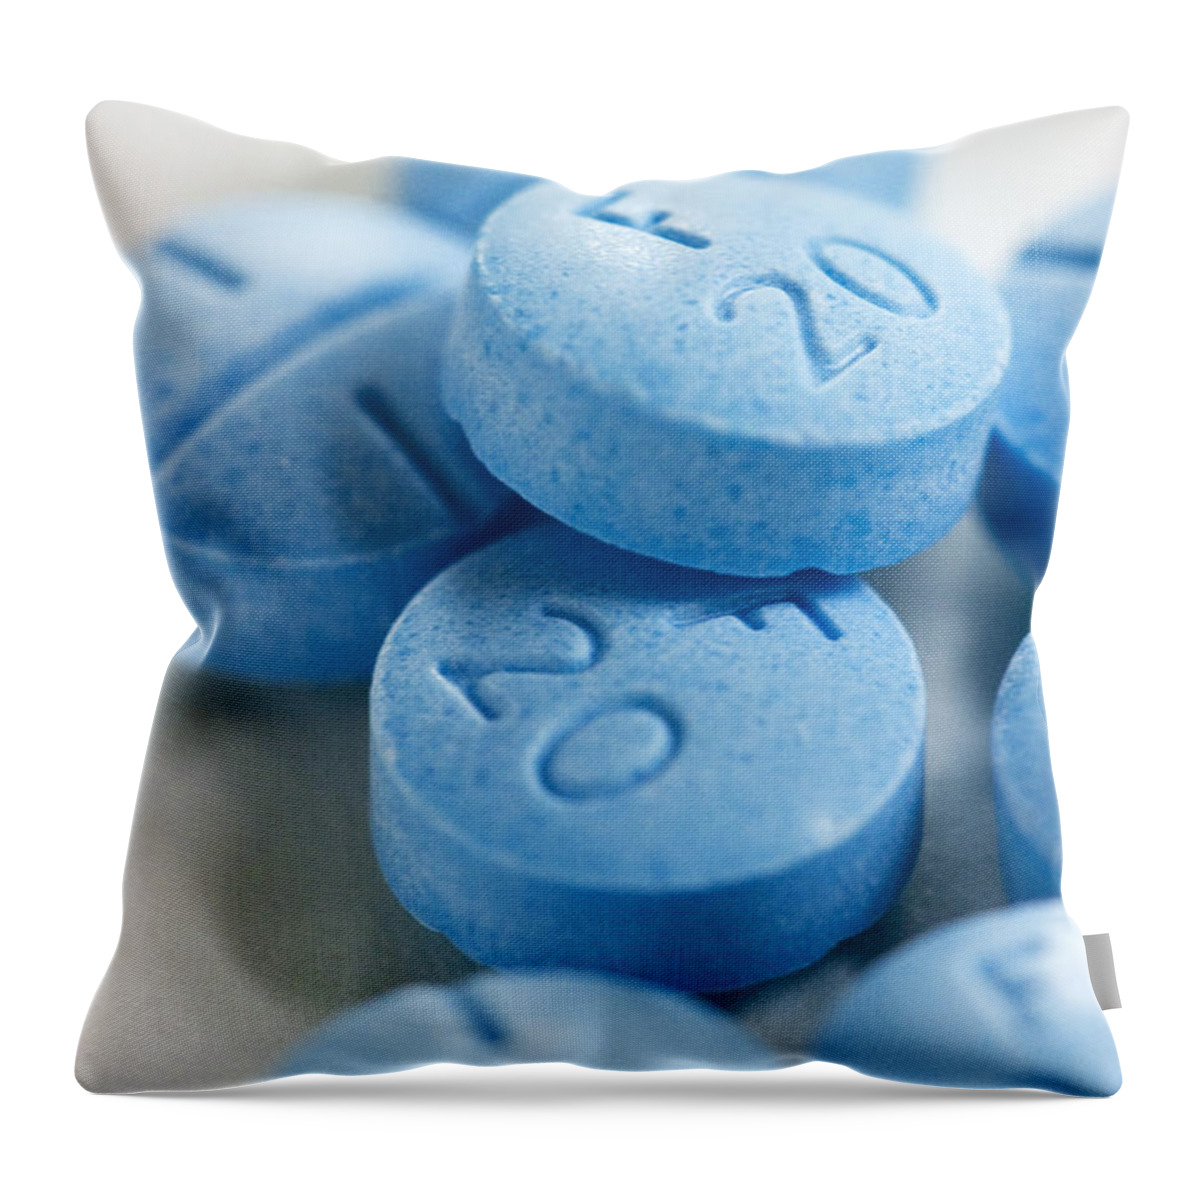 Adderall Throw Pillow featuring the photograph Adderall by Chris Gallagher